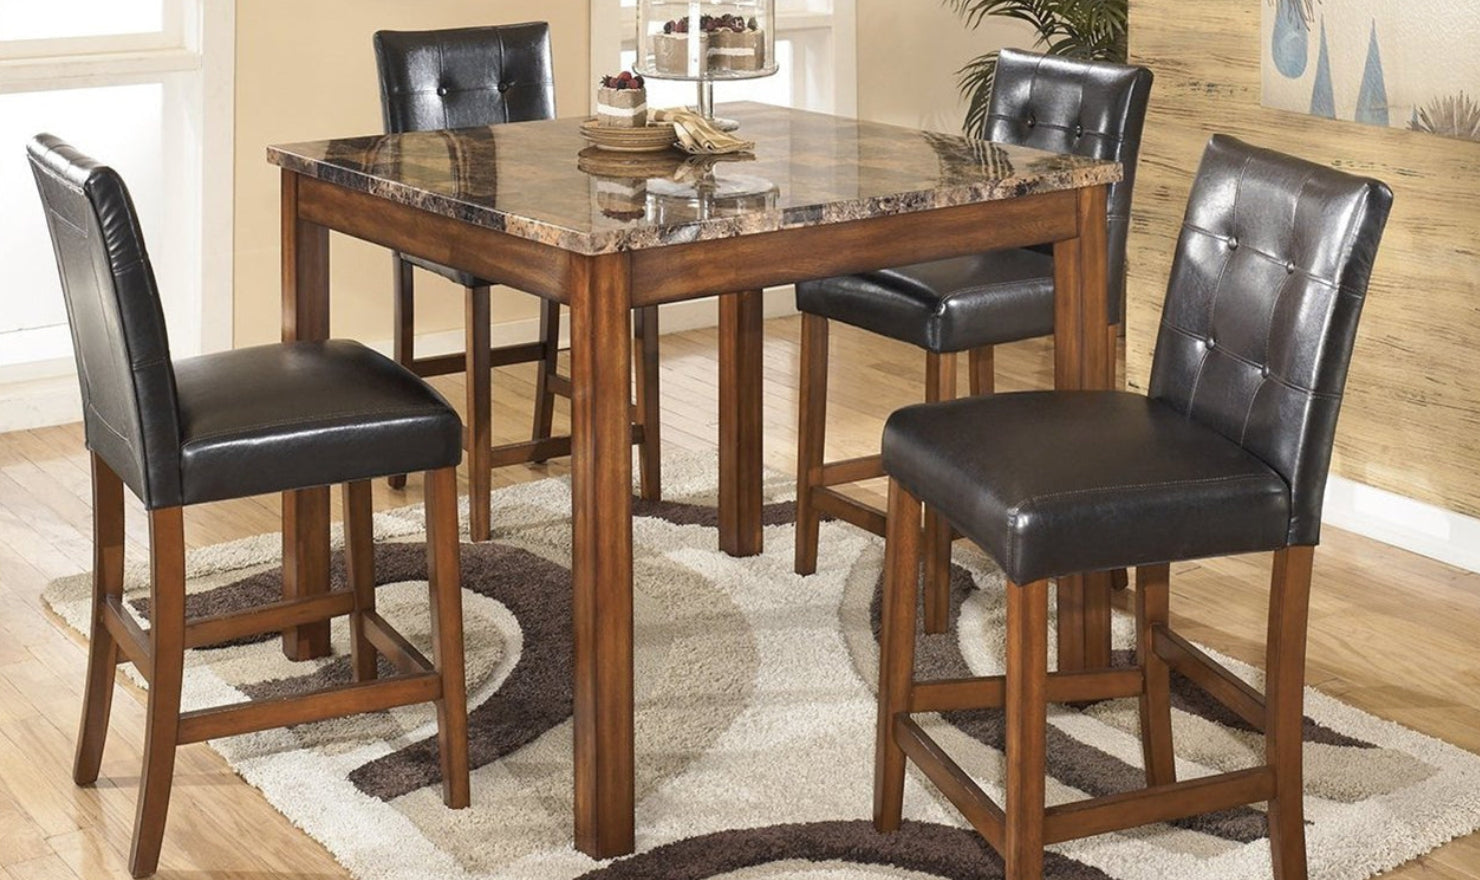 Square dining Table